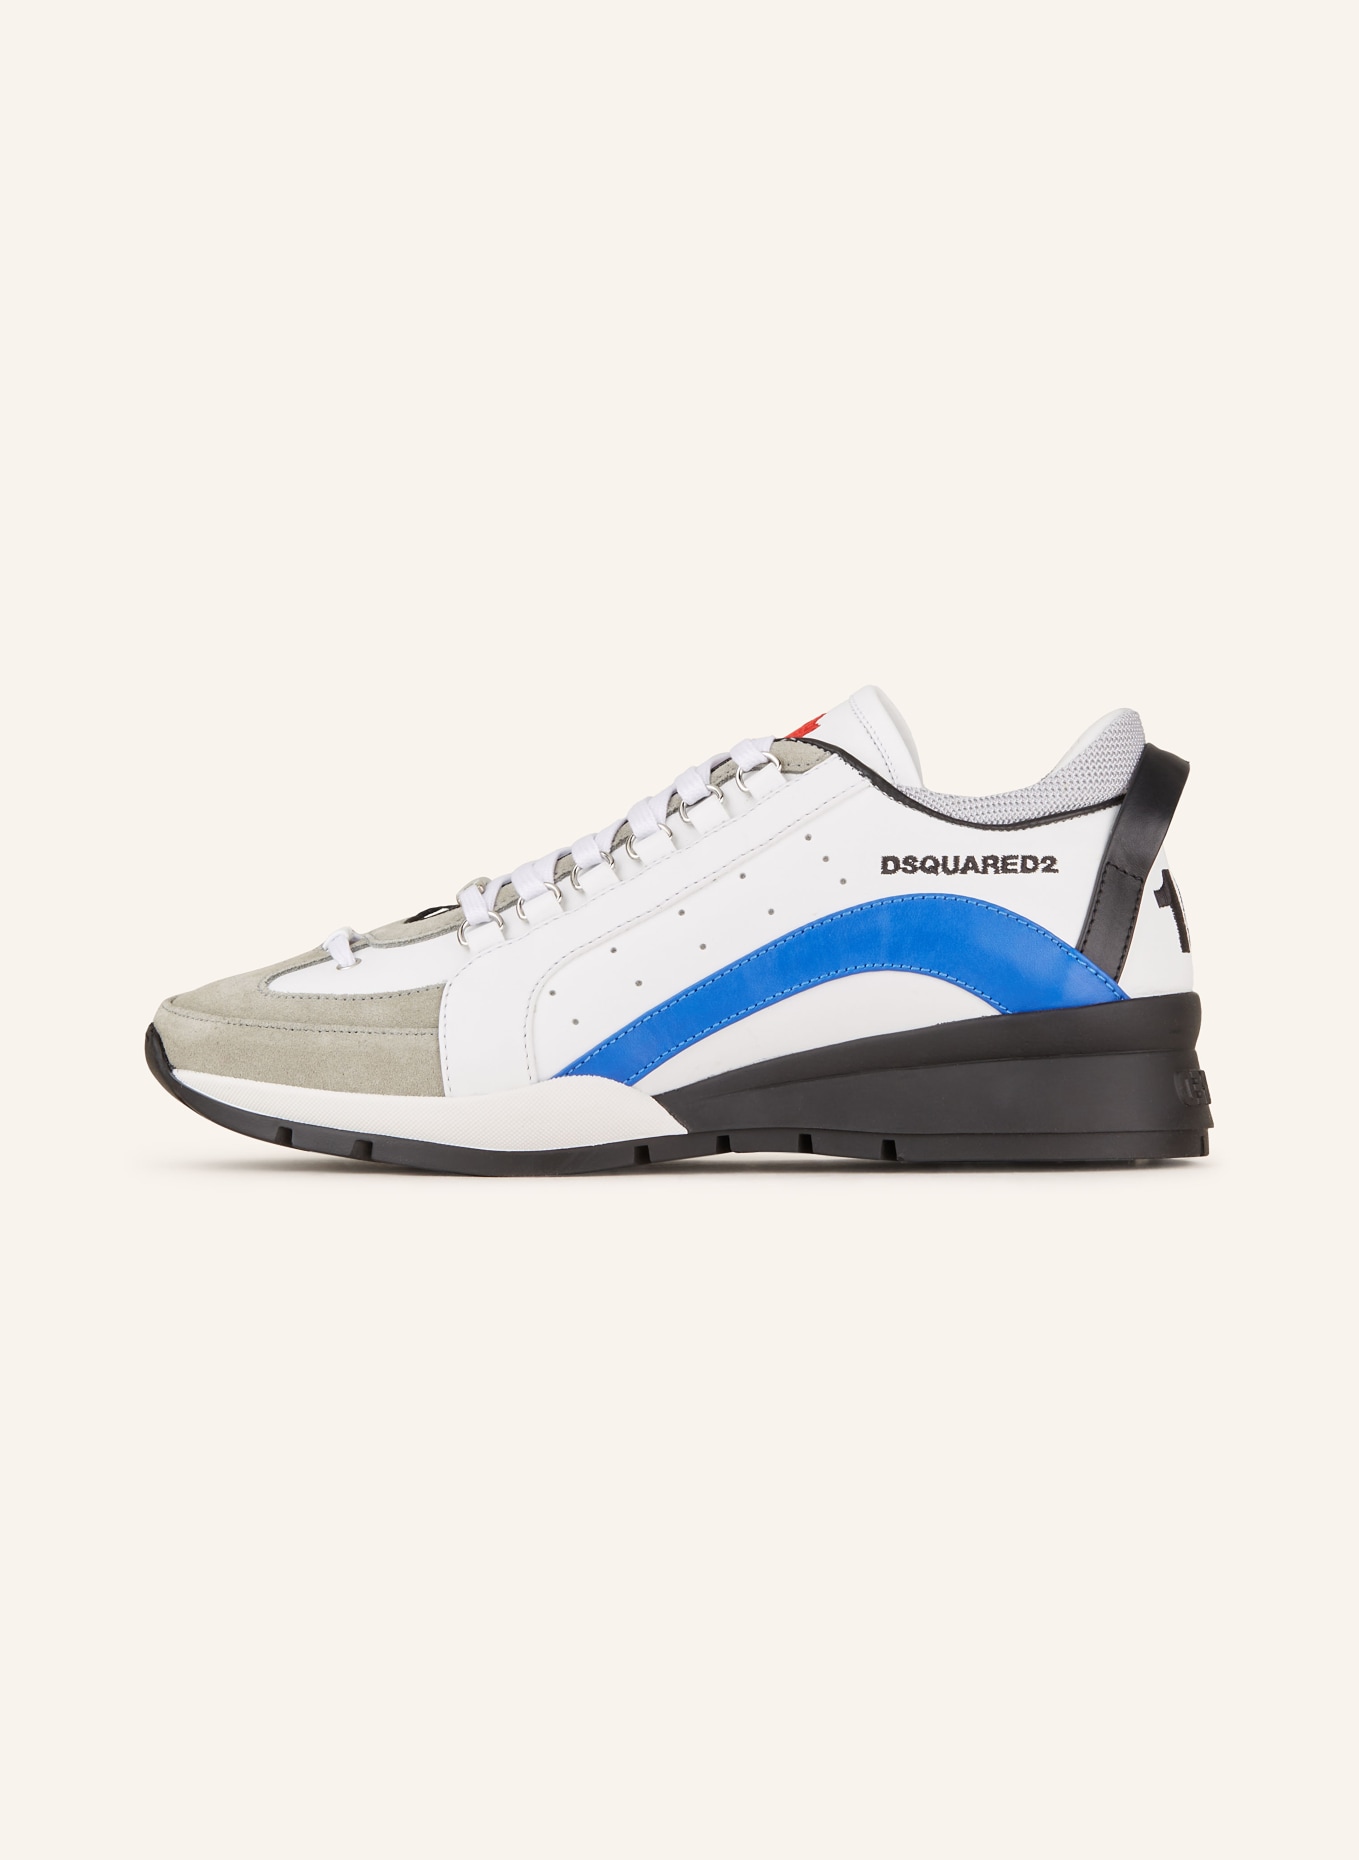 DSQUARED2 Sneakers LEGENDARY, Color: WHITE/ BLUE/ GRAY (Image 4)